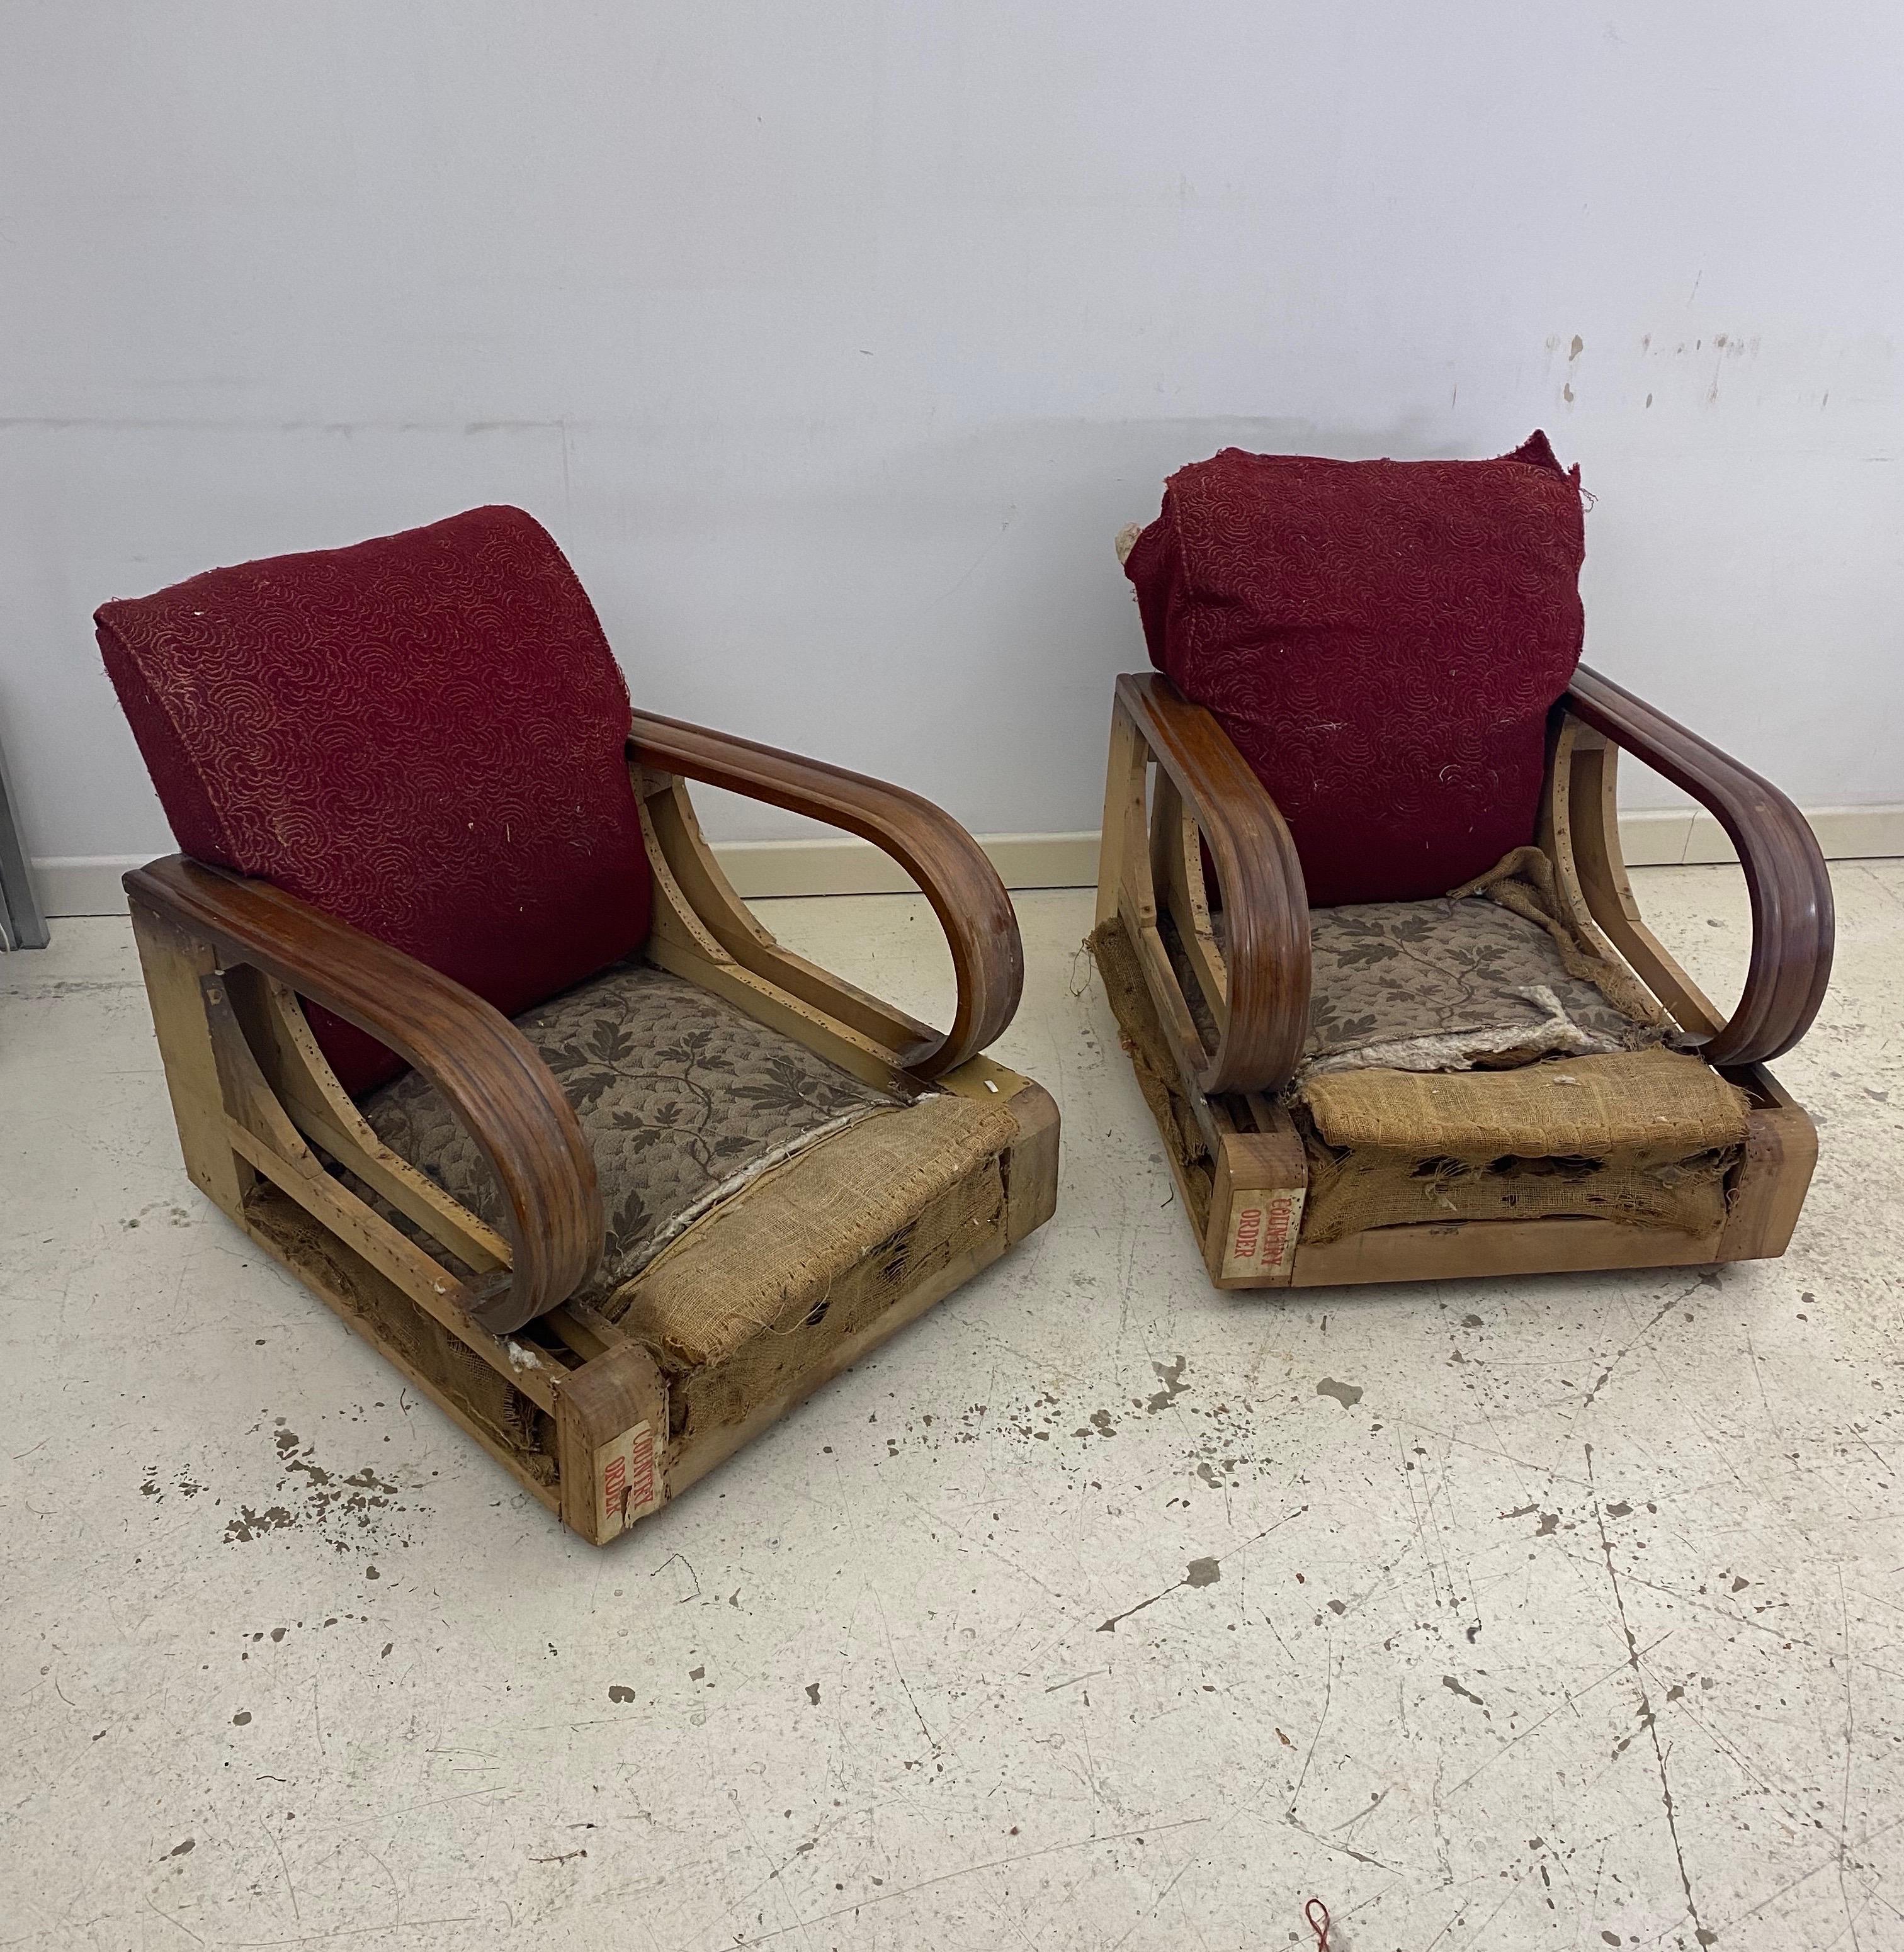 1940s Art Deco pair of distressed armchairs, featuring timeless oak wood arms, as seen at Hercule Poirot BBC series. 

This piece requires comprehensive restoration due to woodworm damage affecting the frame, the arms are not affected. Once the